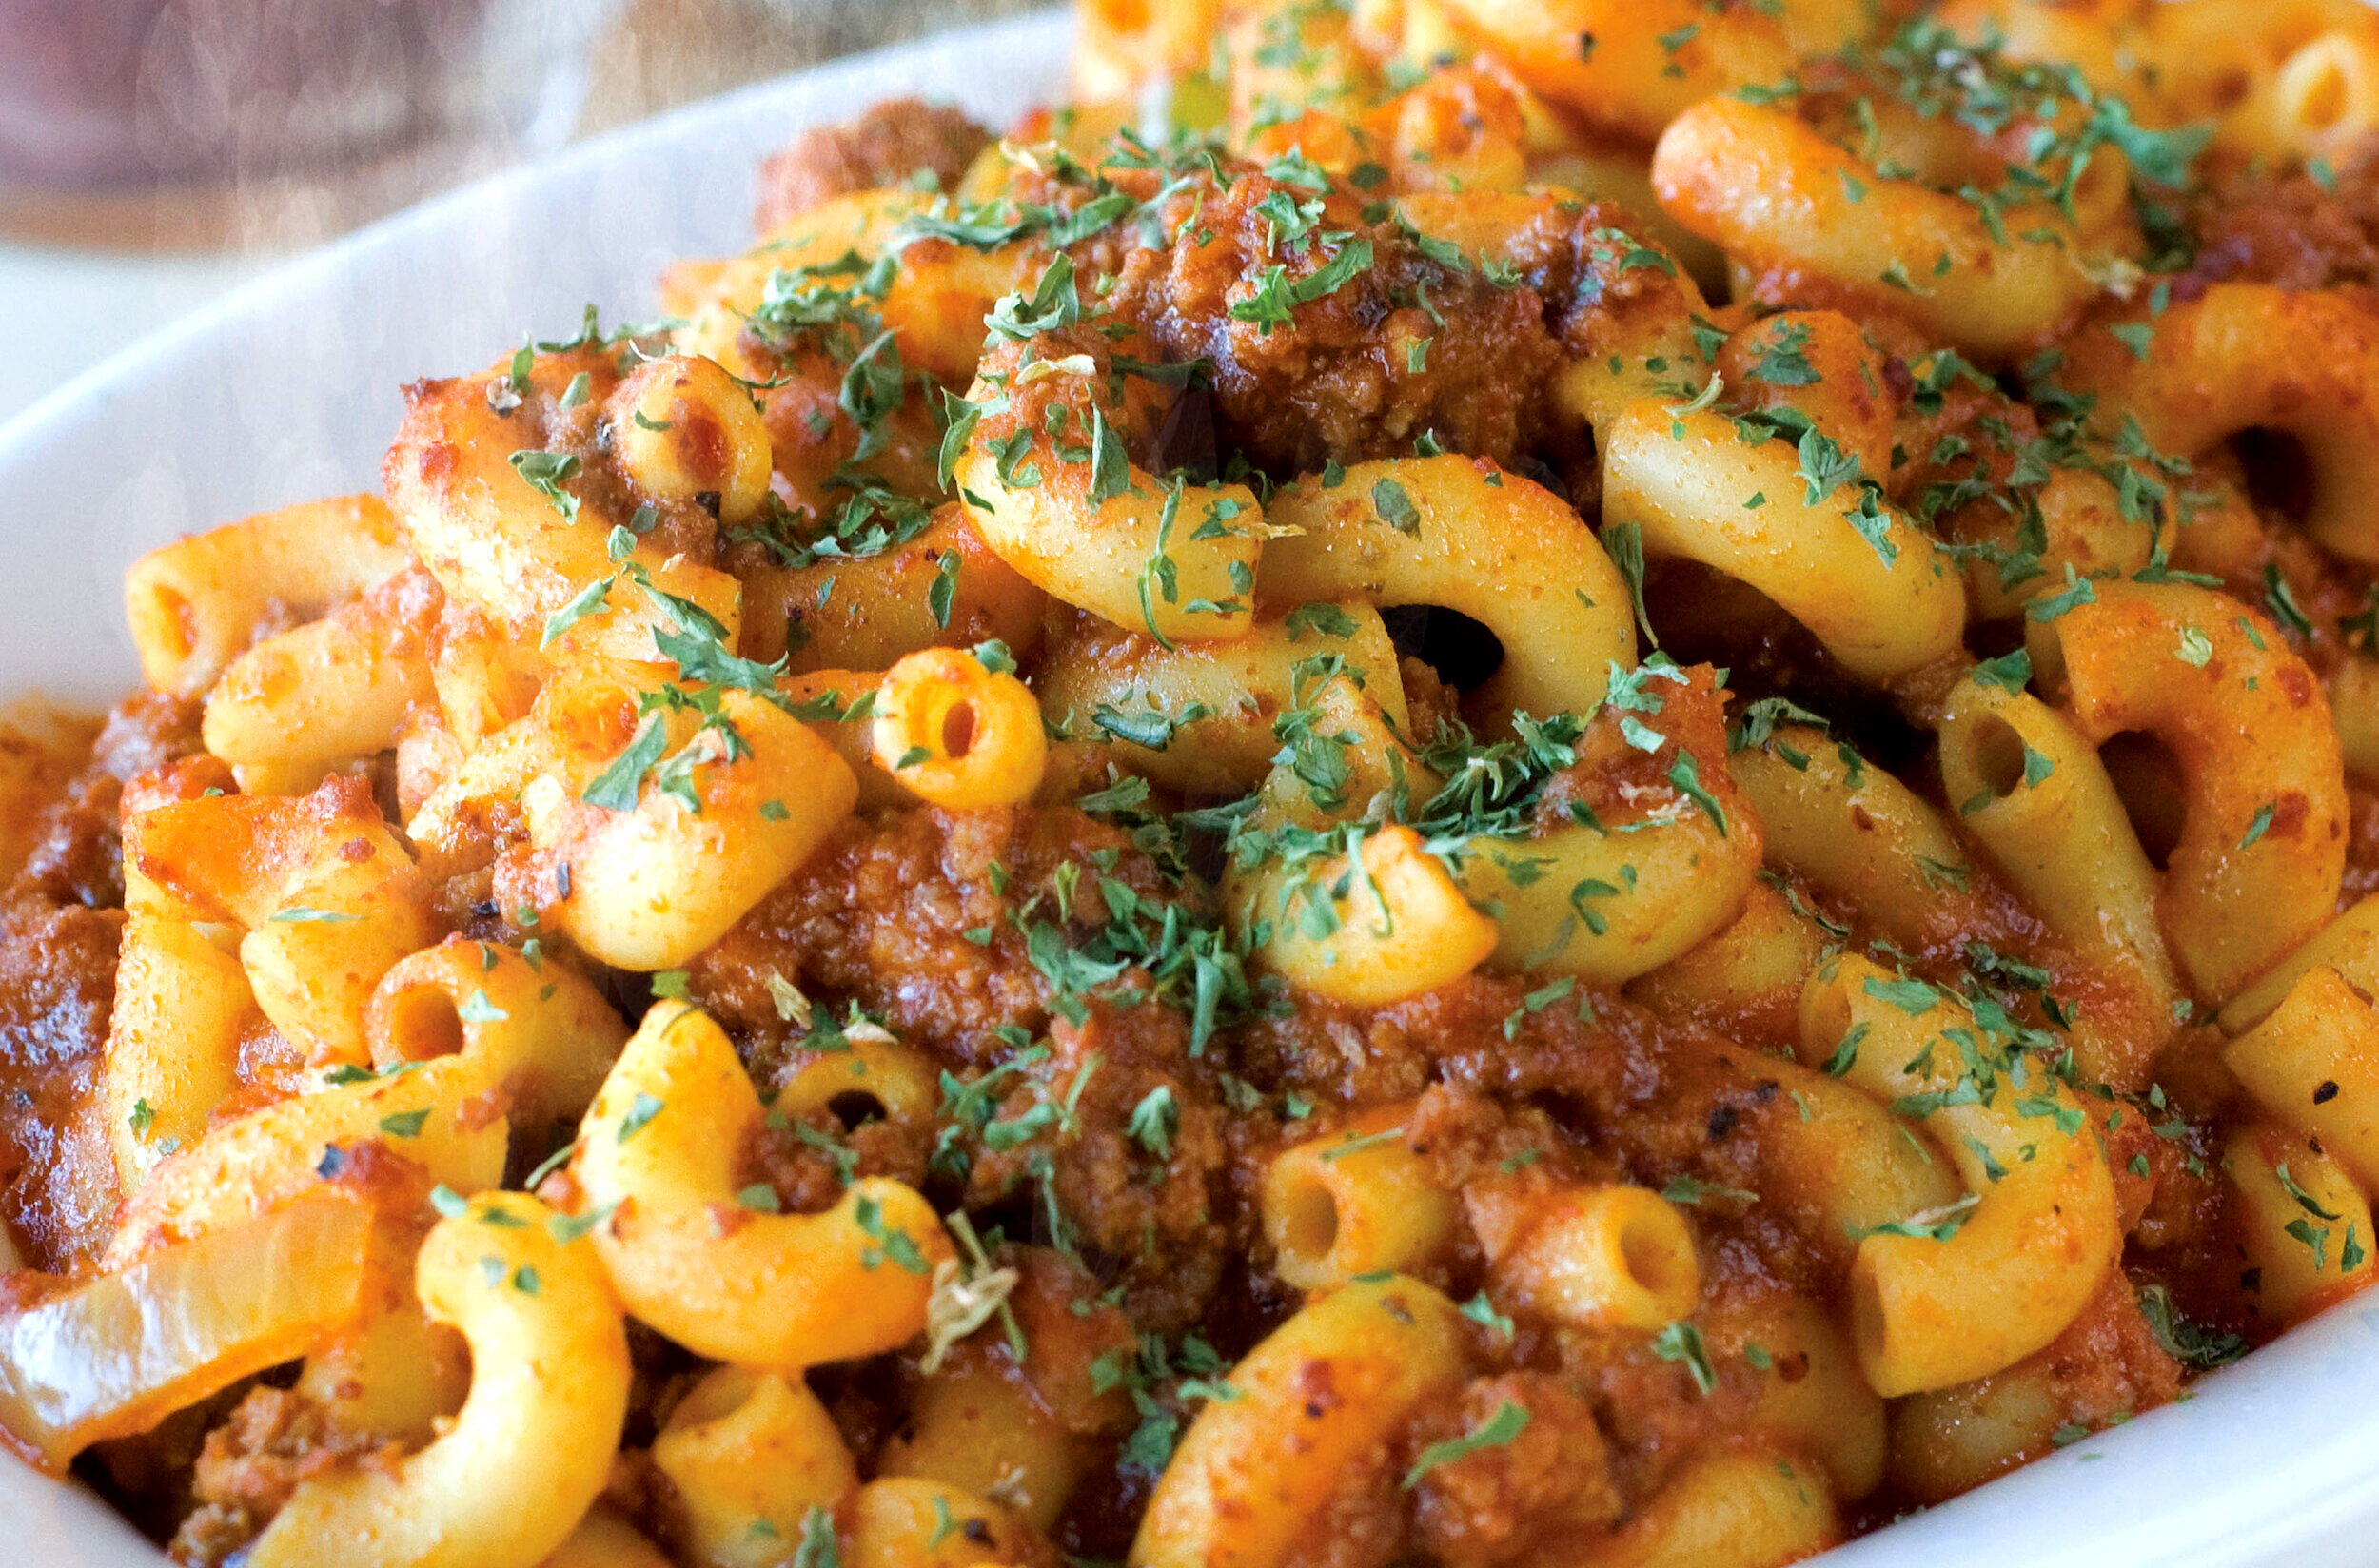 Kids Pasta with Meat Sauce (Copy)